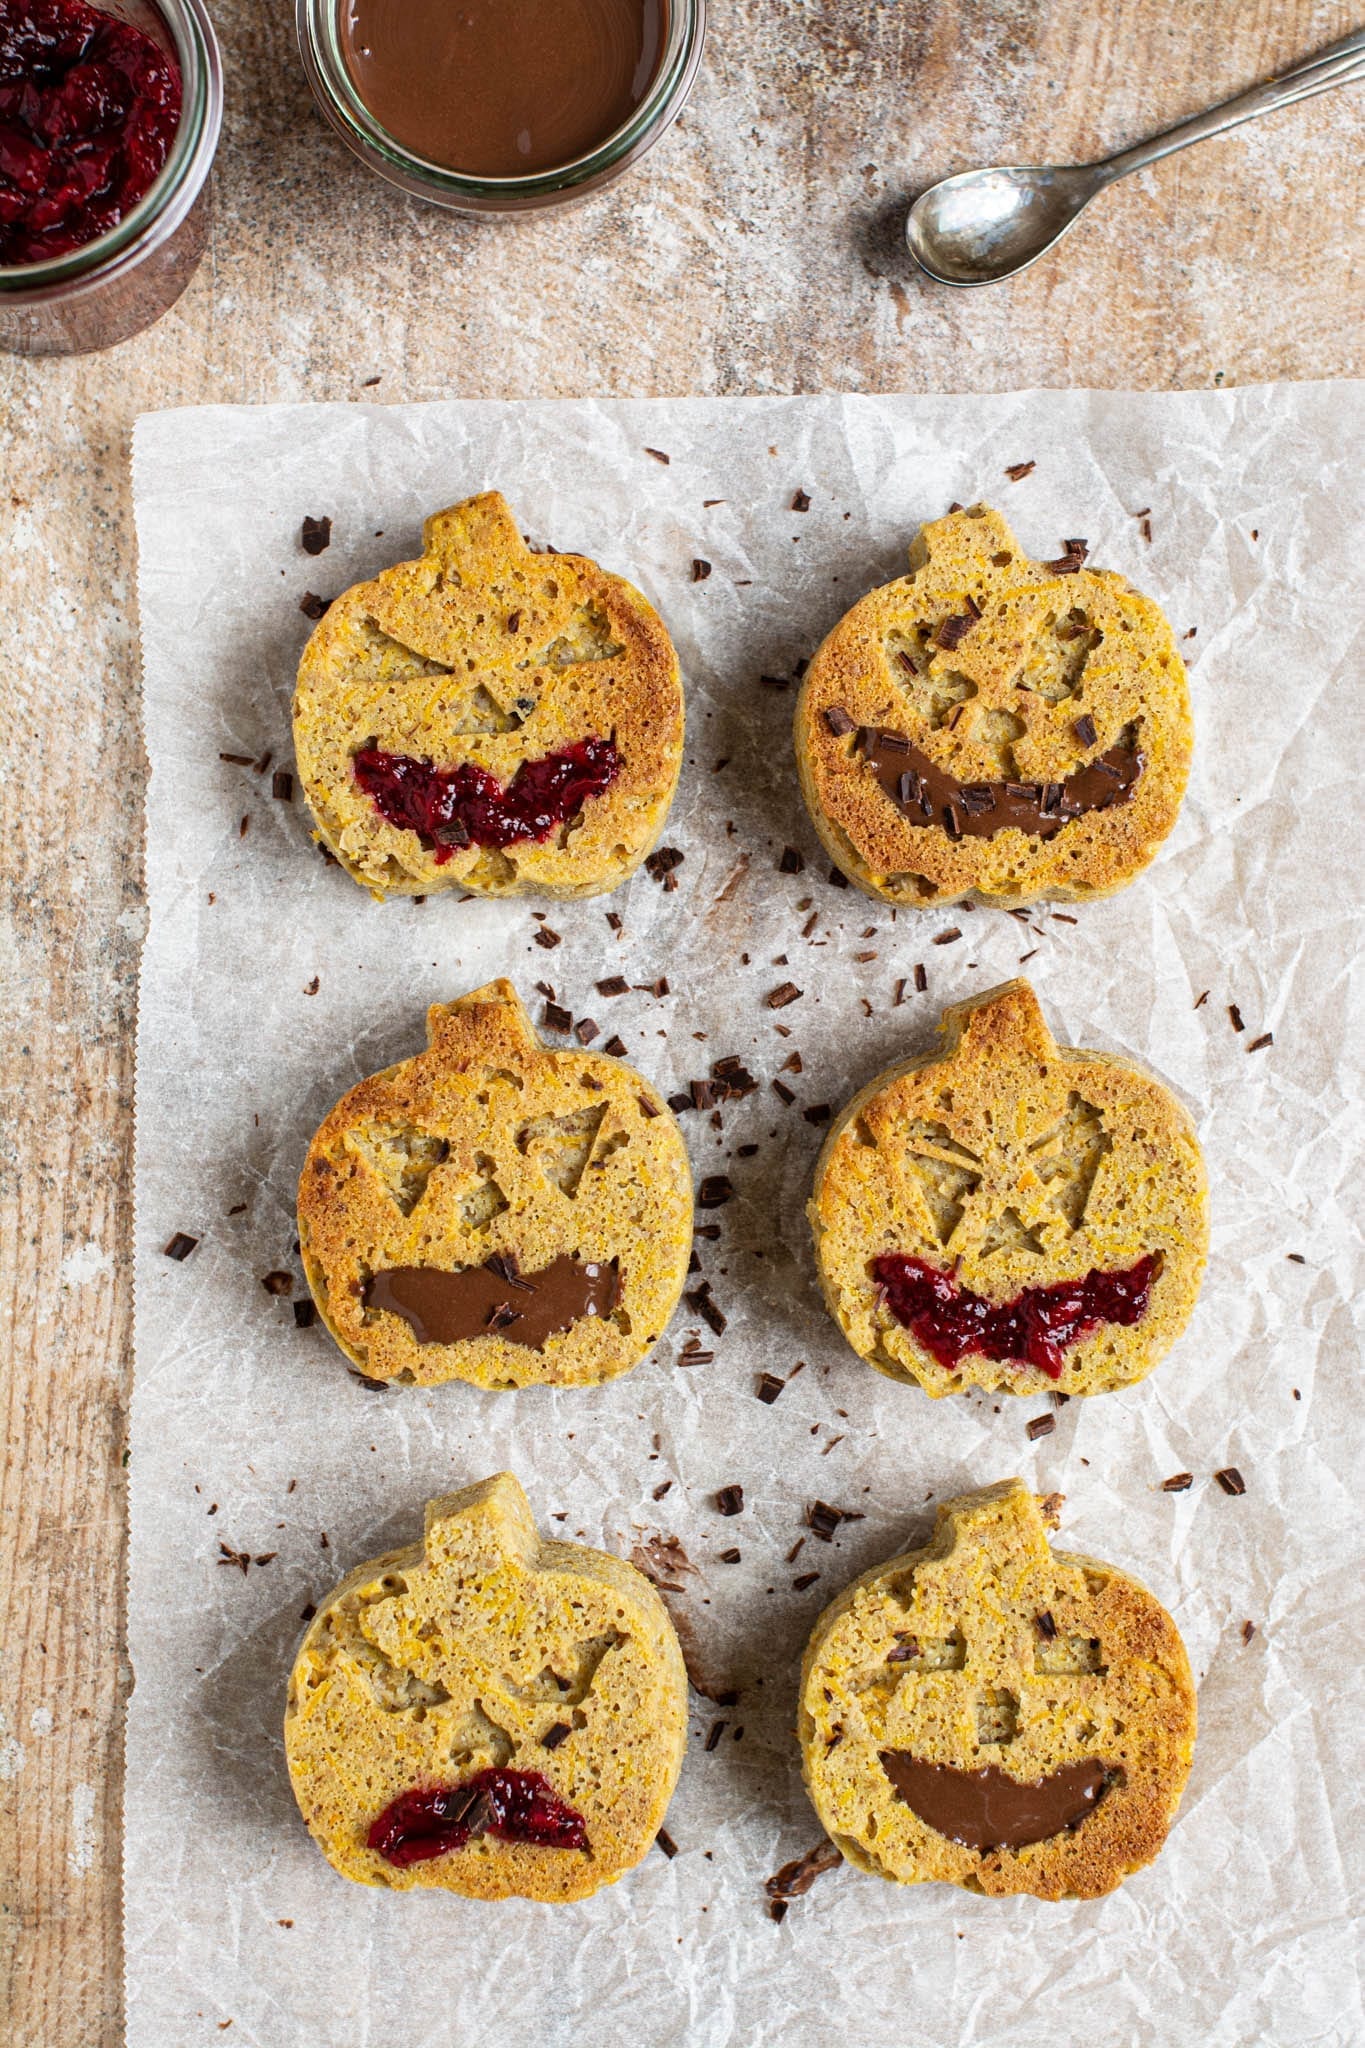 Moist and delicious Halloween butternut squash muffins that are gluten-free, oil-free, low glycemic and vegan.